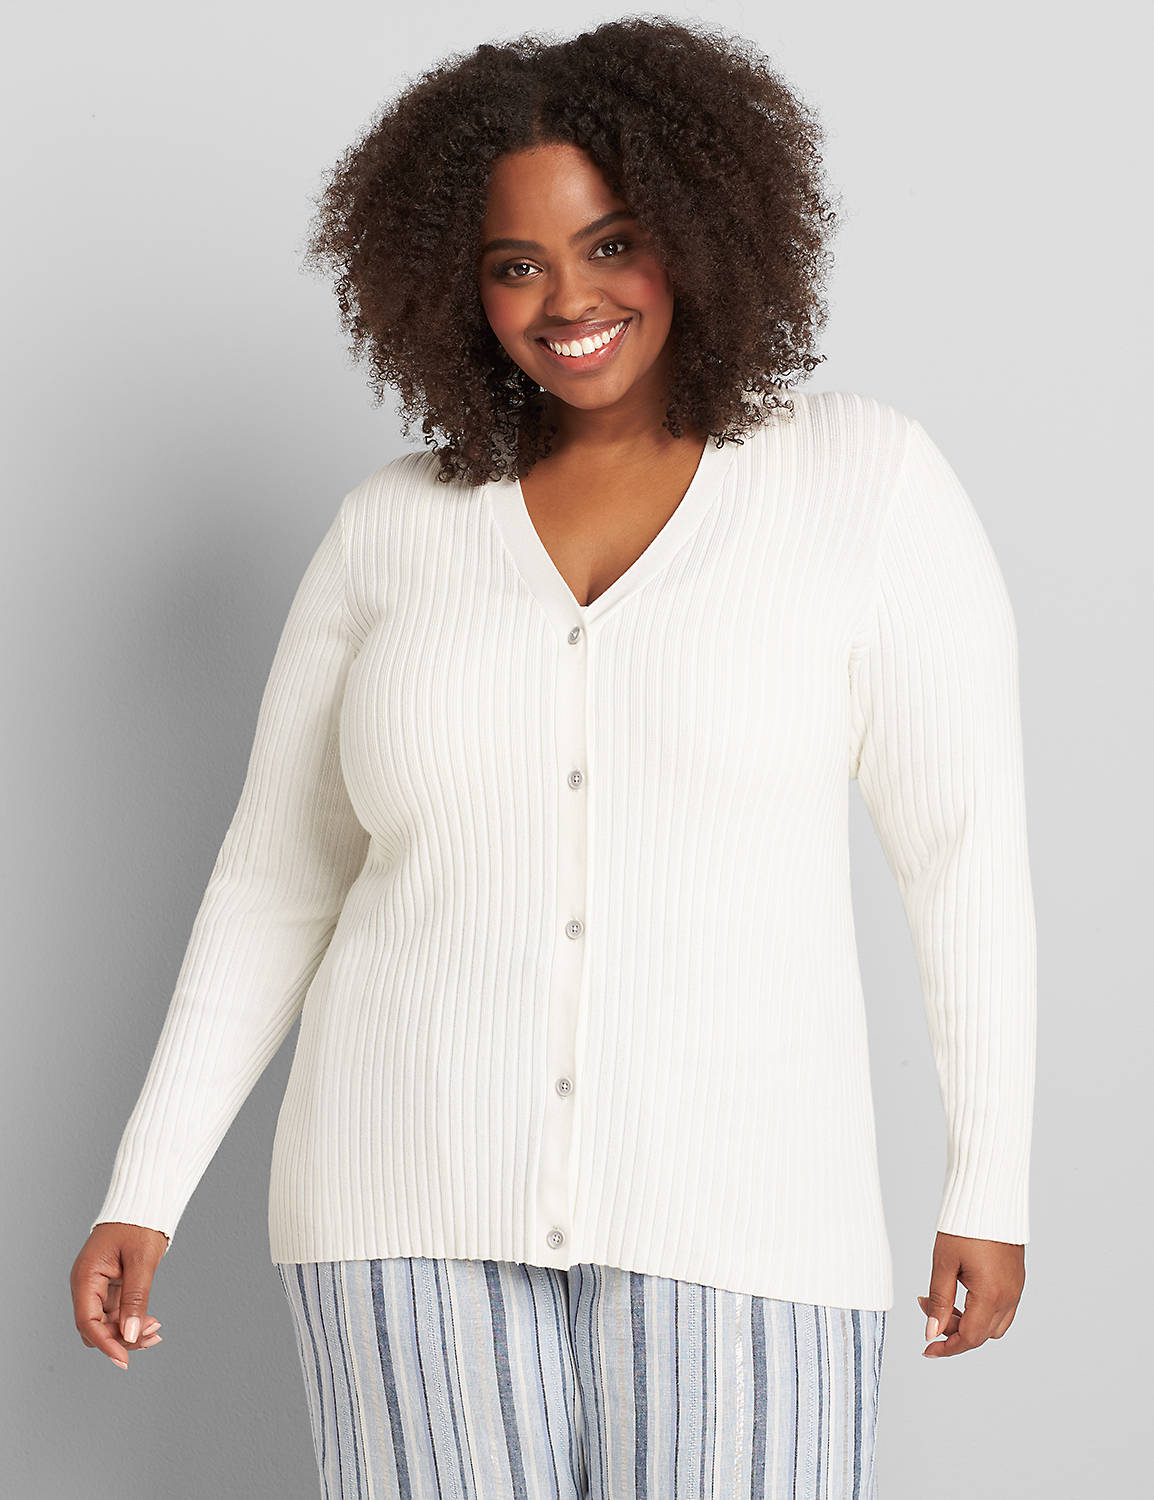 Long Sleeve VNeck Button Front Cardigan in Rib Stitch 1121476:Ascena White:18/20 Product Image 1